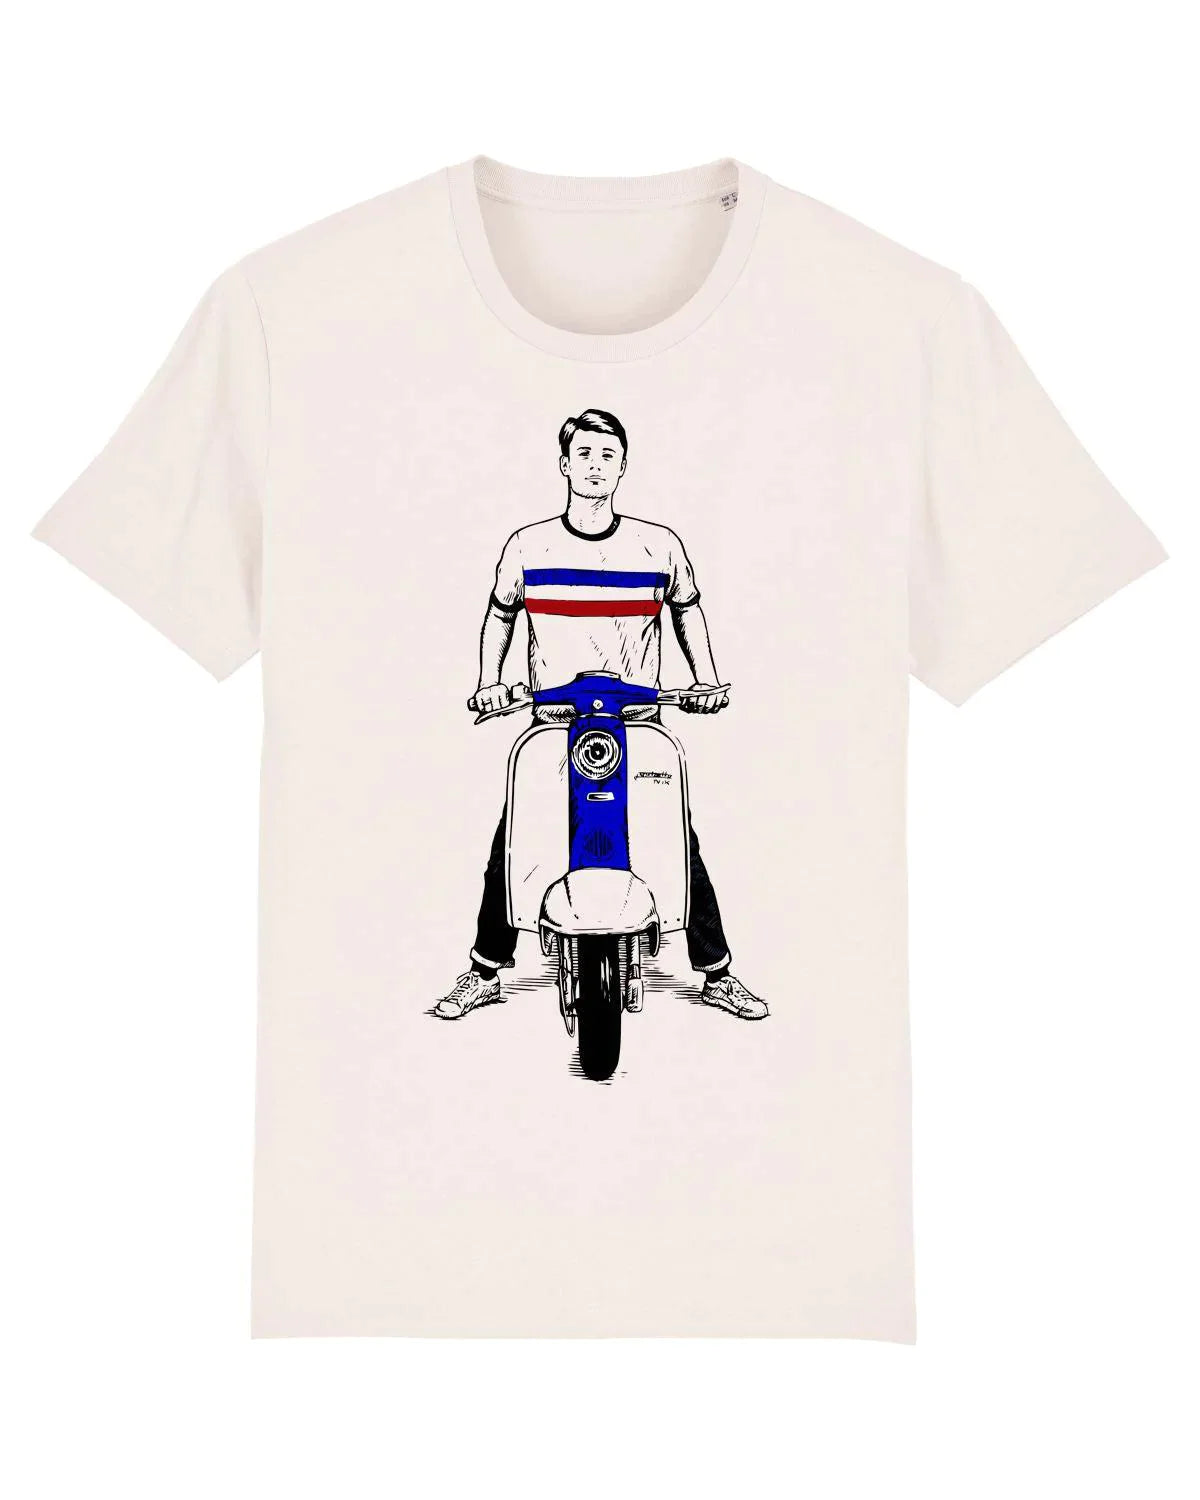 SCOOTER STYLE: T-Shirt Inspired by Scootering, Lambretta and Art Gallery Clothing. - SOUND IS COLOUR